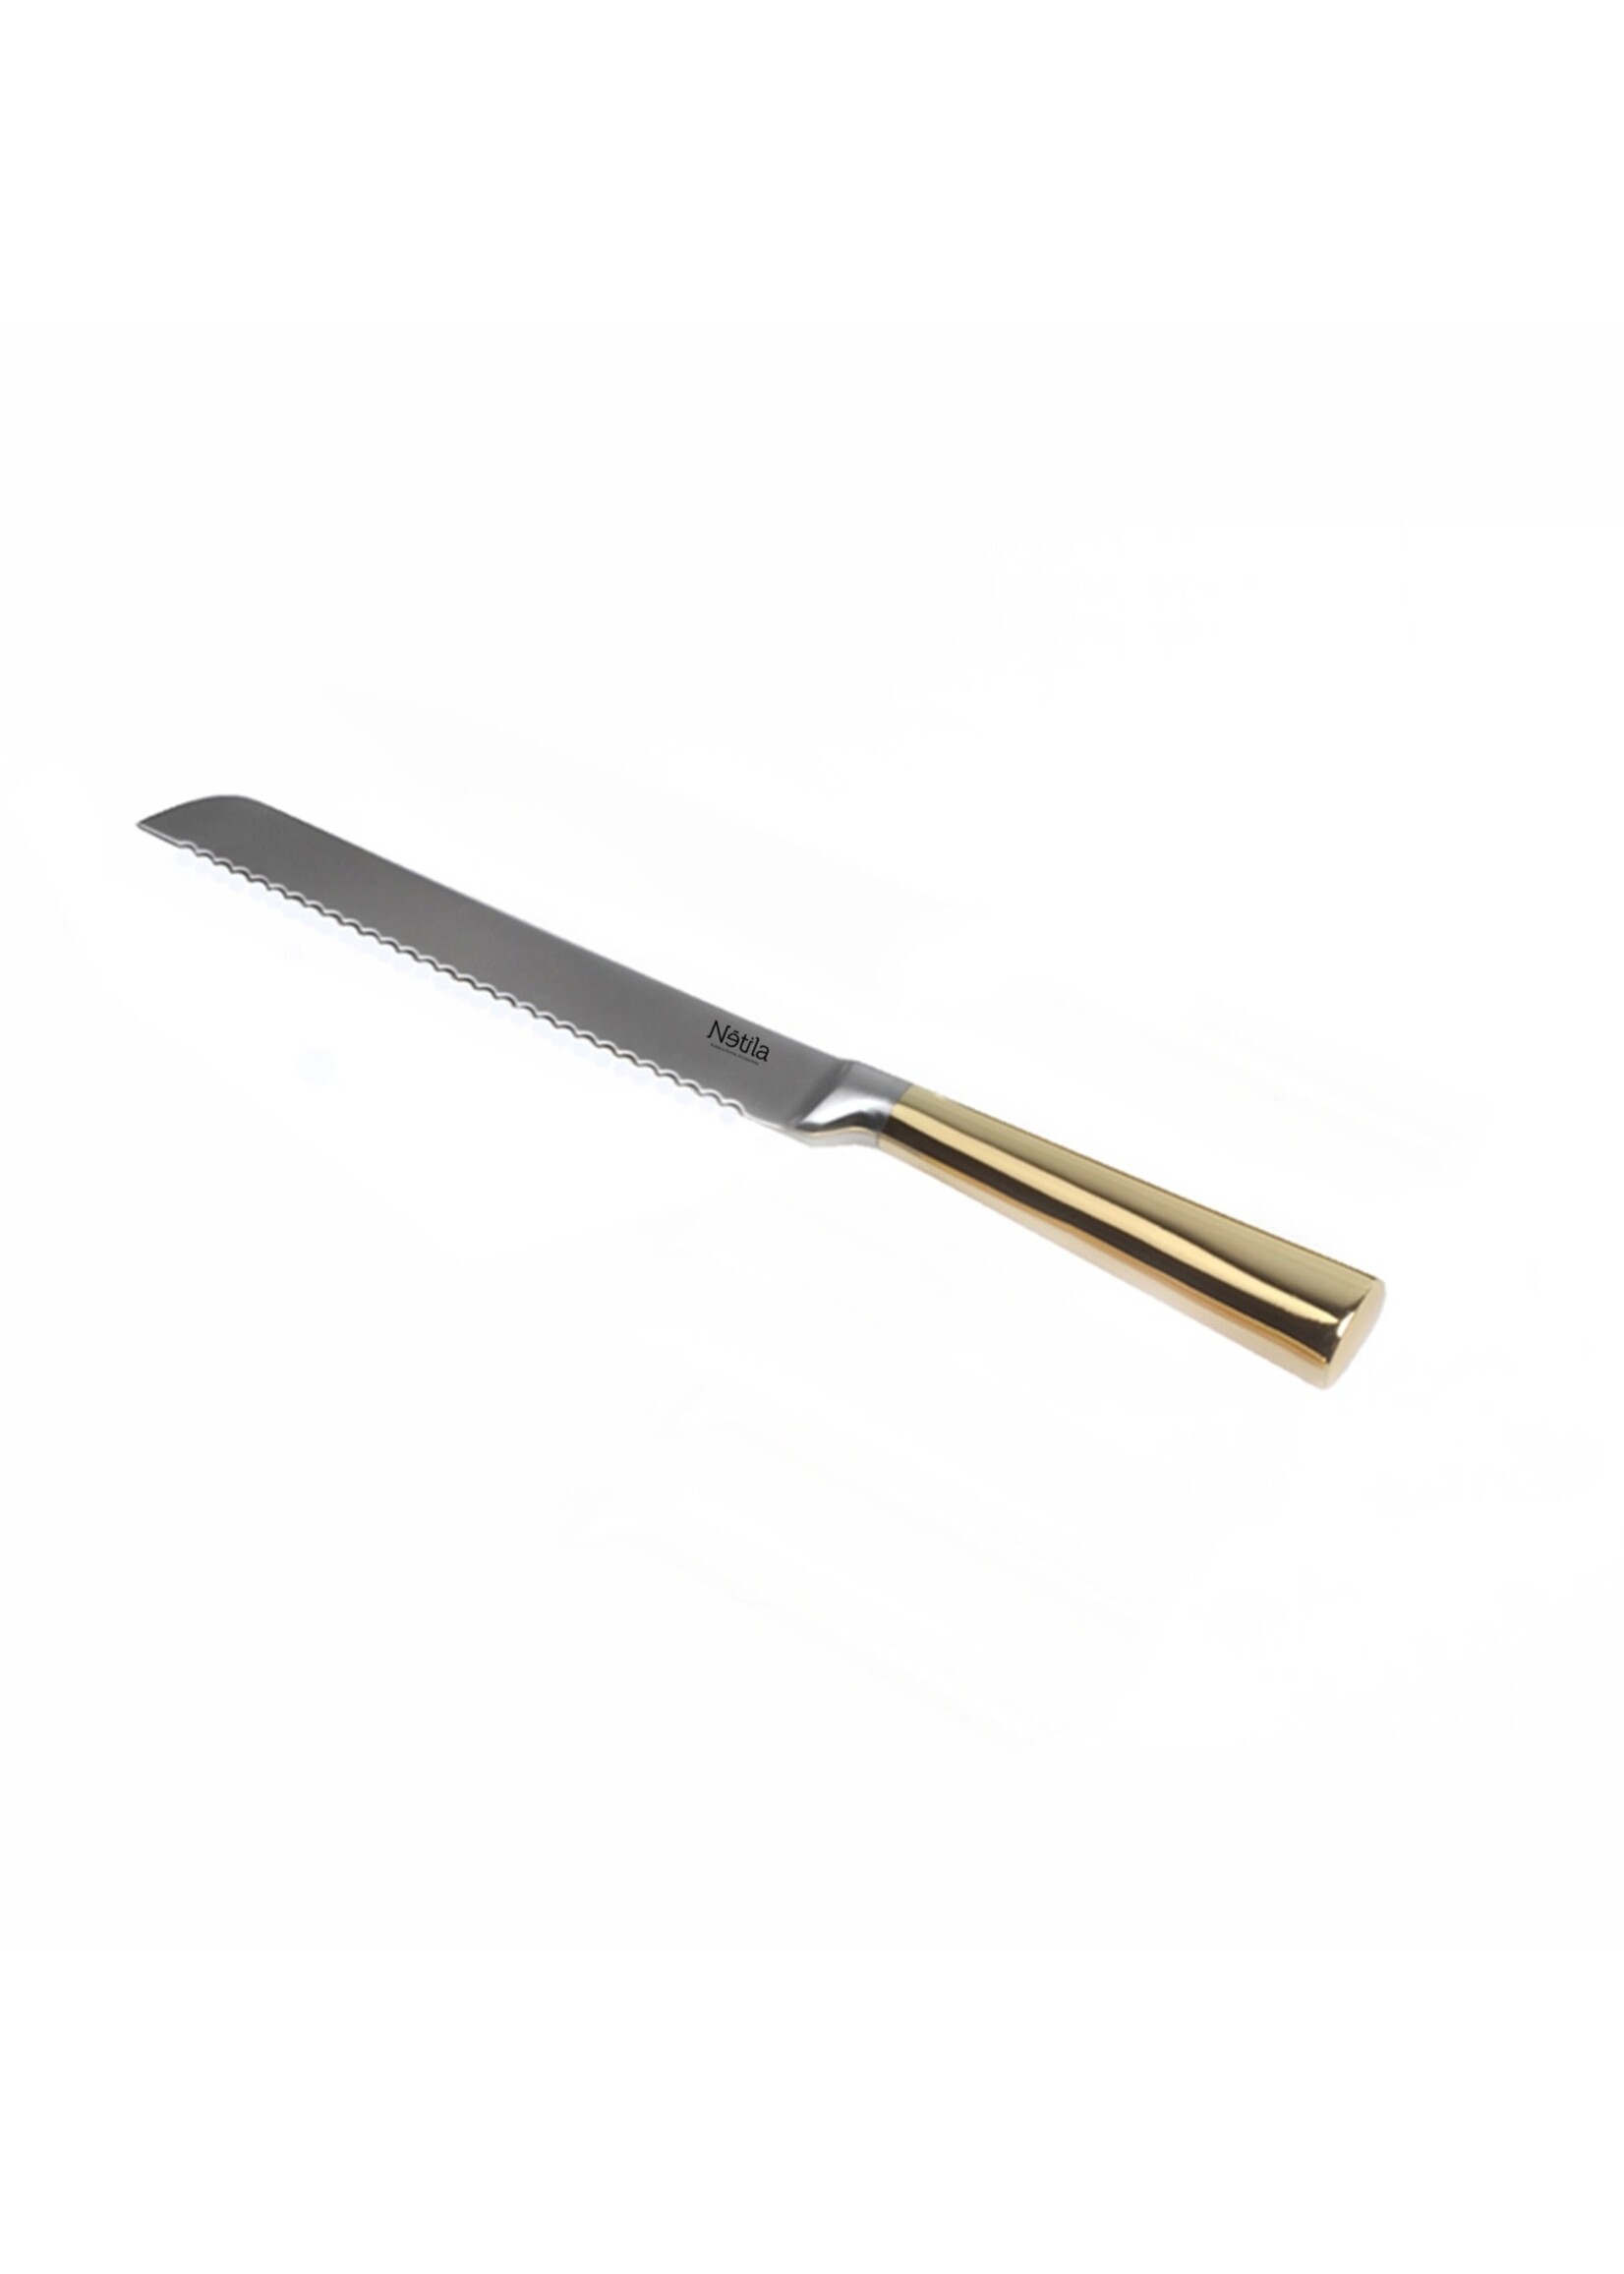 STAINLESS STEEL KNIVE BRUSHED GOLD HANDLE